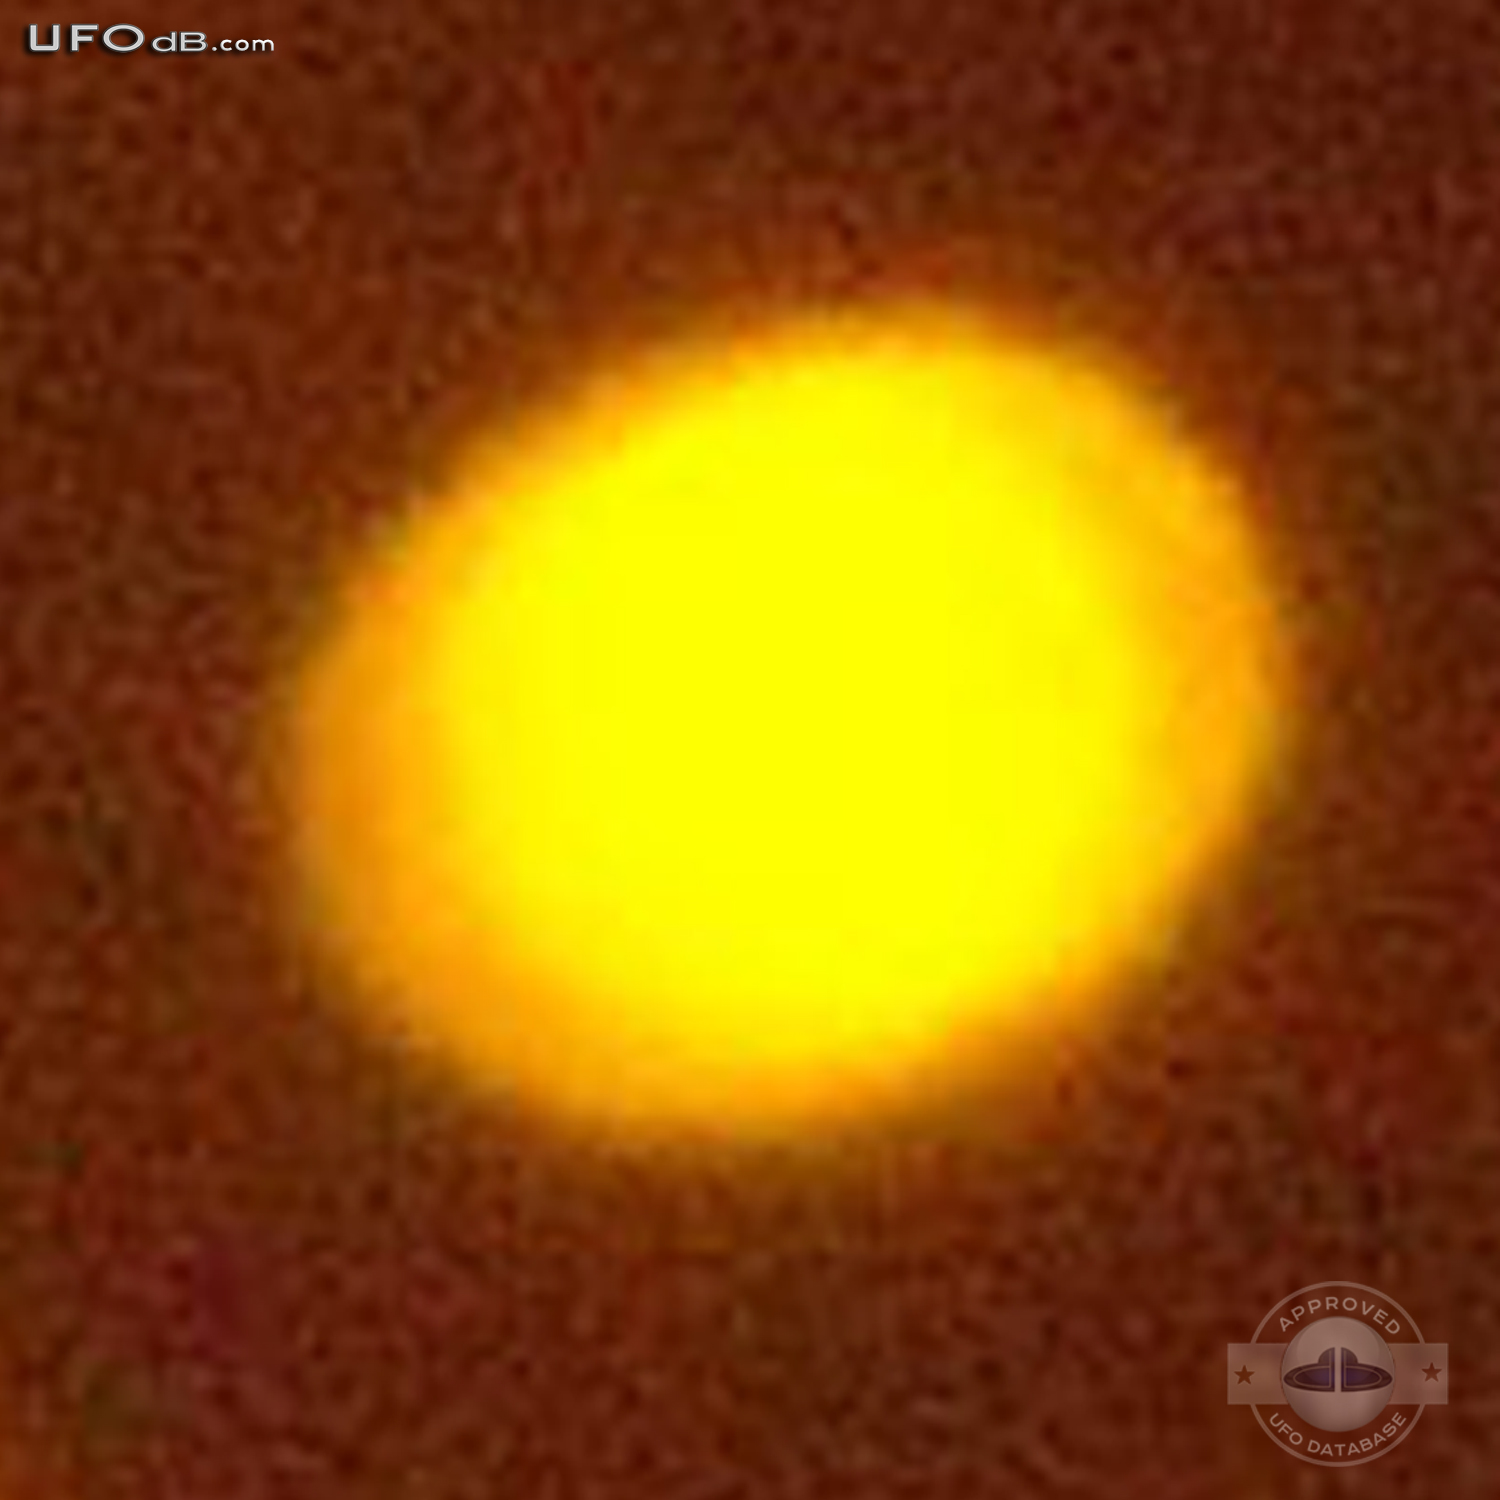 Pulsating Orange UFOs near Fort Carson Army Base | USA | May 12 2011 UFO Picture #310-5